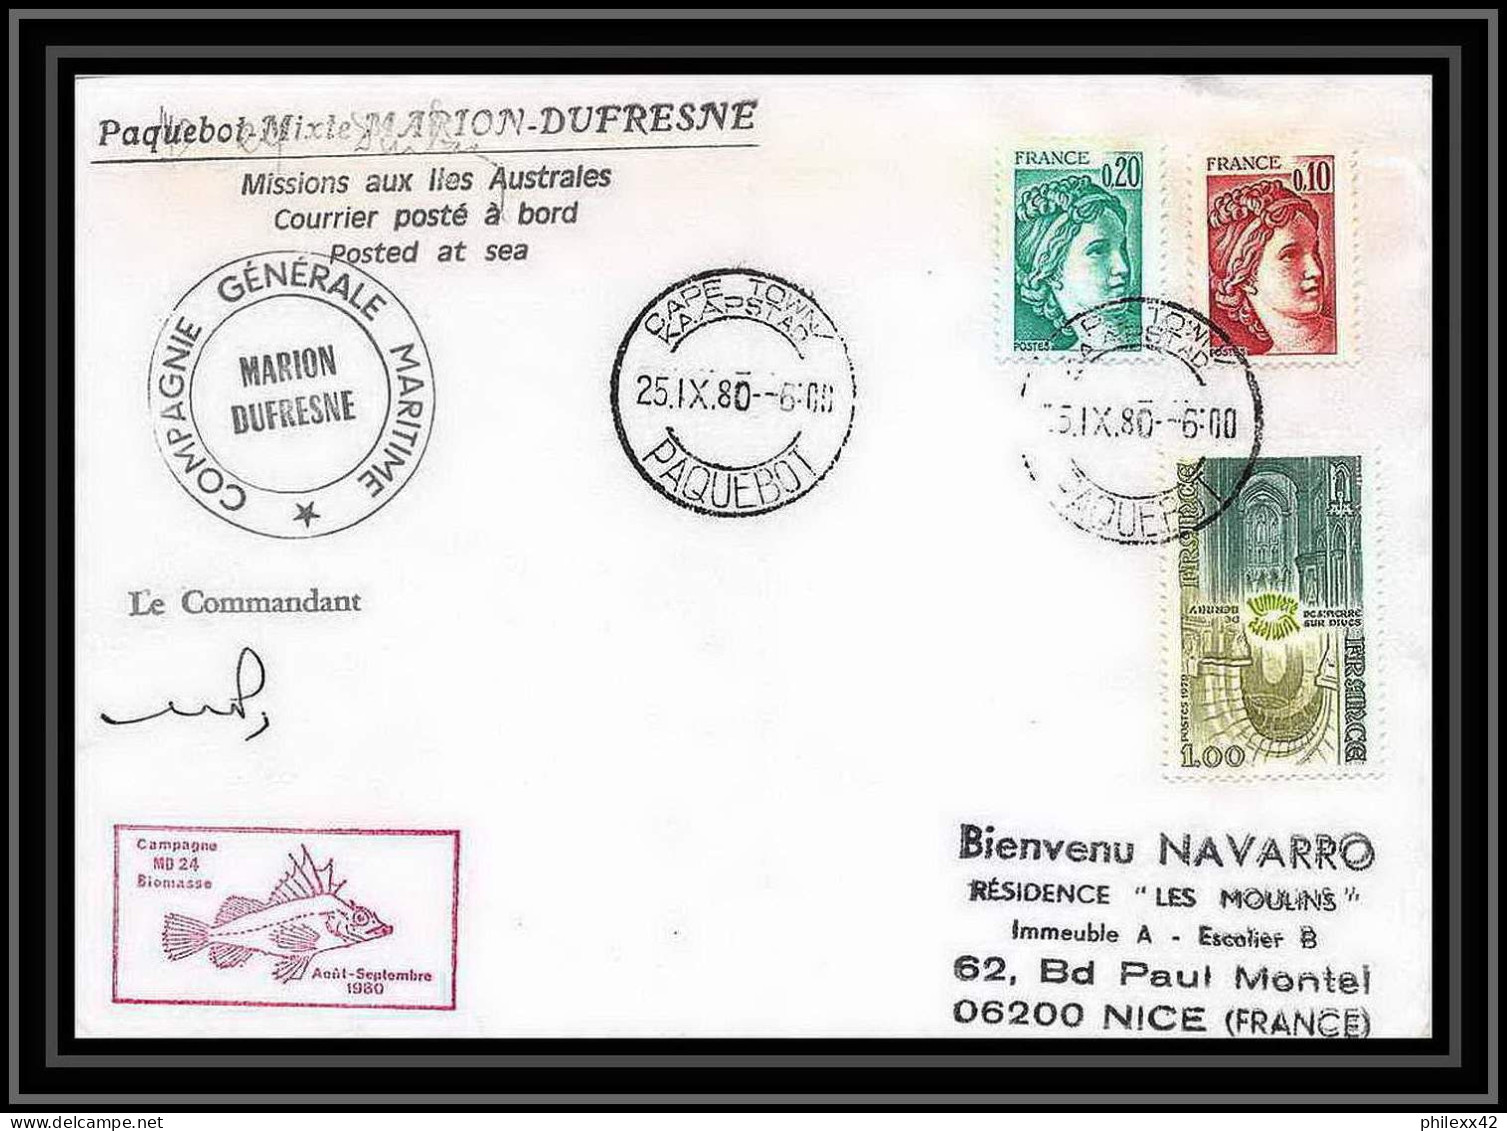 1285 Marion Dufresne Campagne MD 24 Biomasse Signé Signed 25/11/1980 TAAF Antarctic Terres Australes Lettre (cover) - Covers & Documents